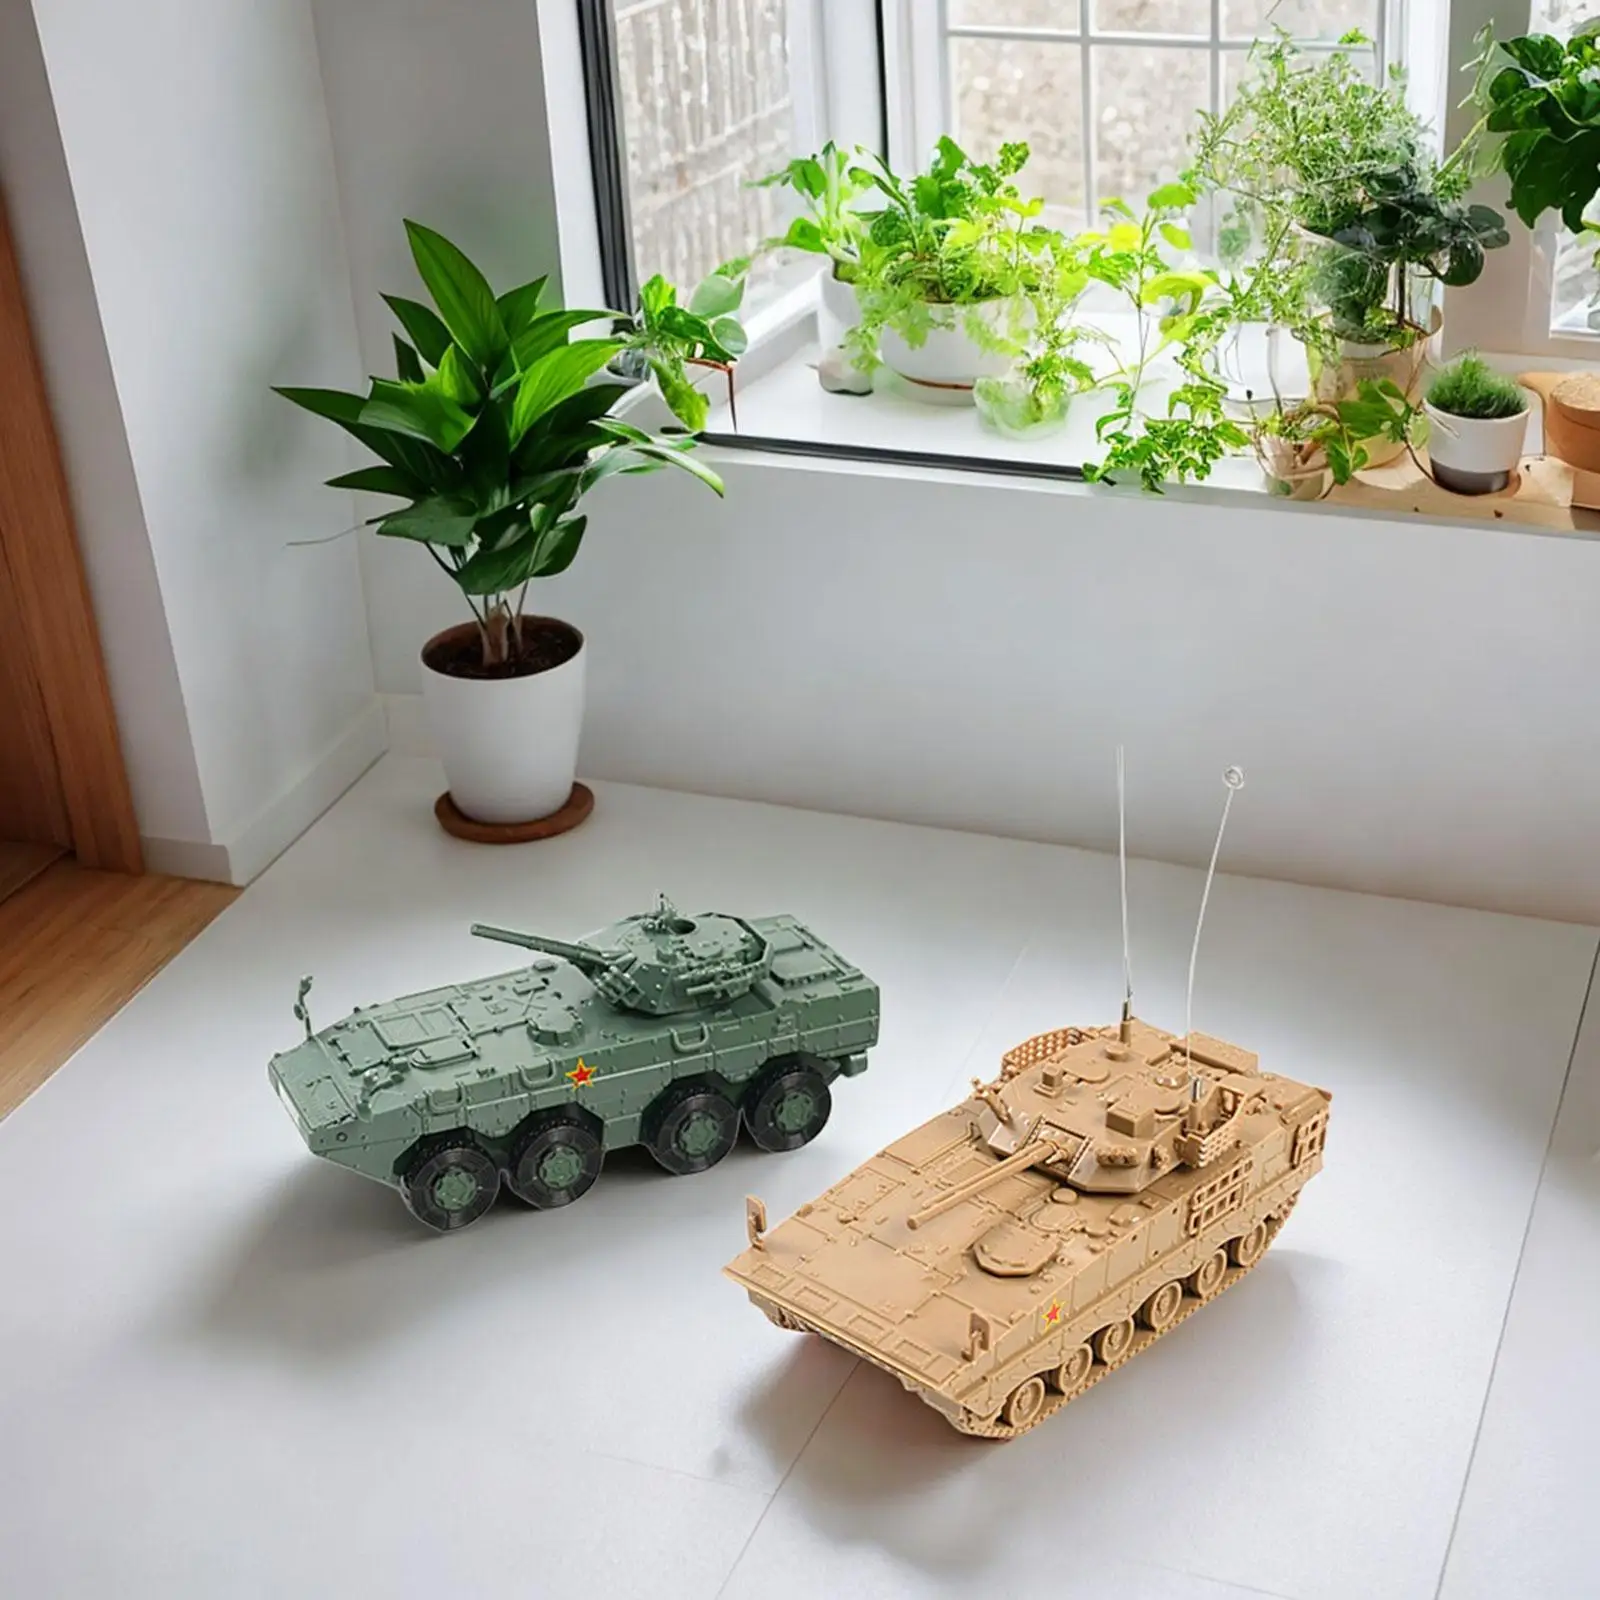 2x 1:72 Scale DIY Tank Model Education Toy Miniature Tank Model Tabletop Decor for Children Friends Adults Holiday Gifts